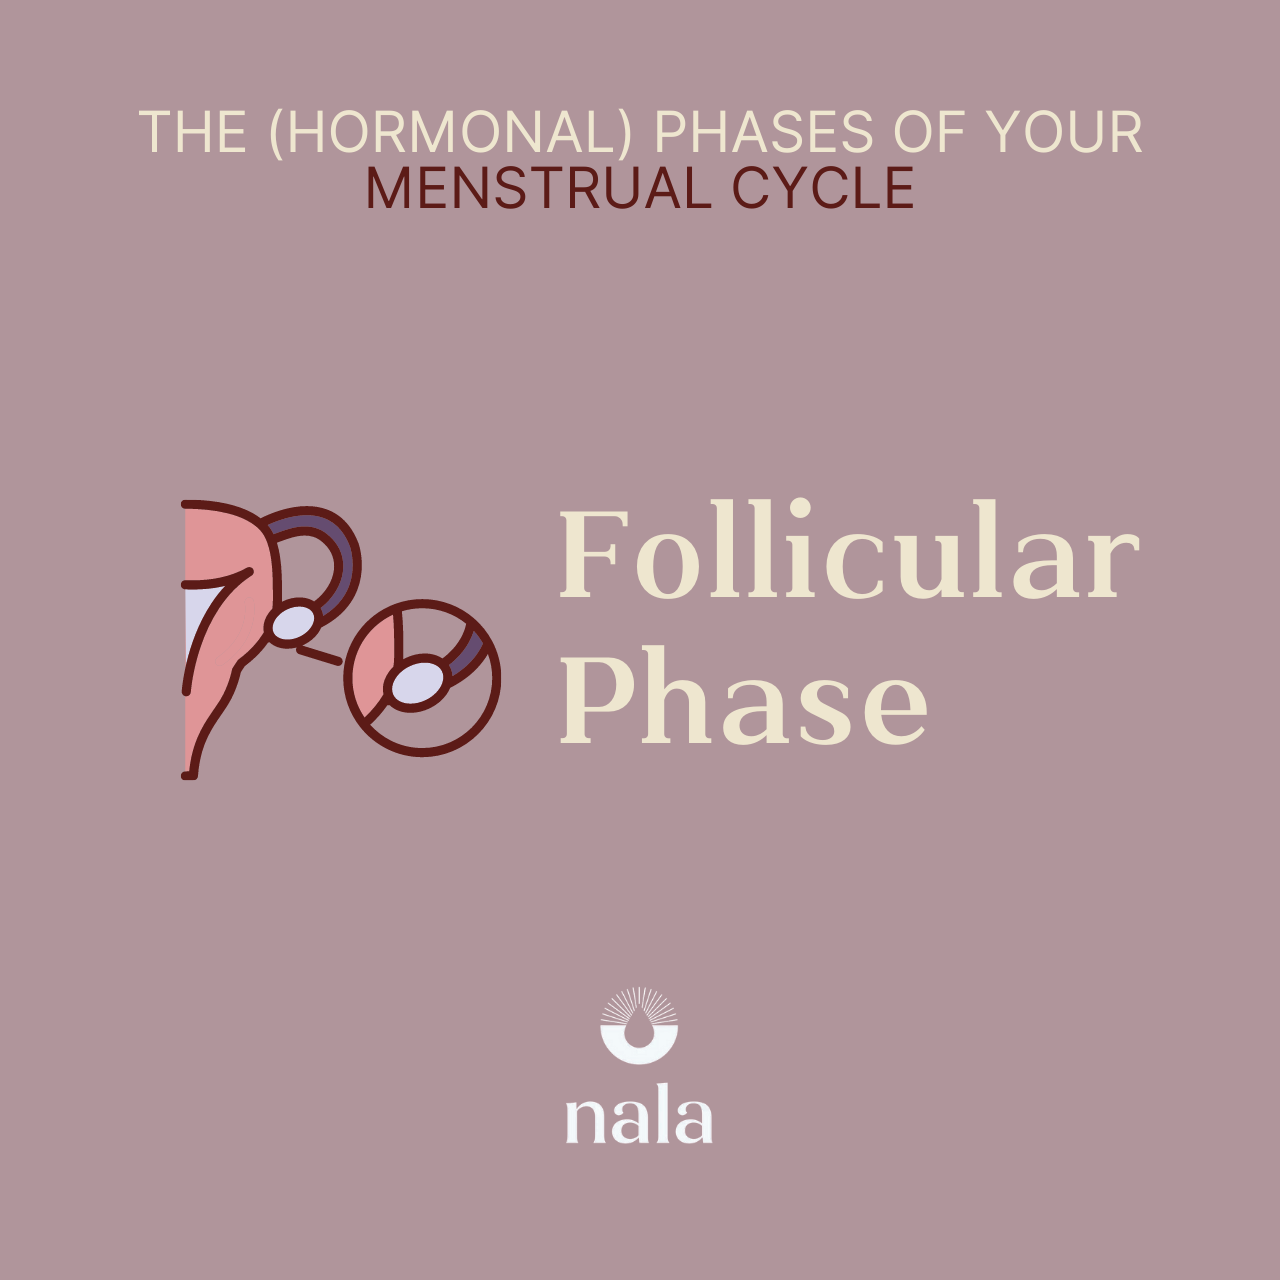 The (Hormonal) Phases of Your Menstrual Cycle: Follicular Phase